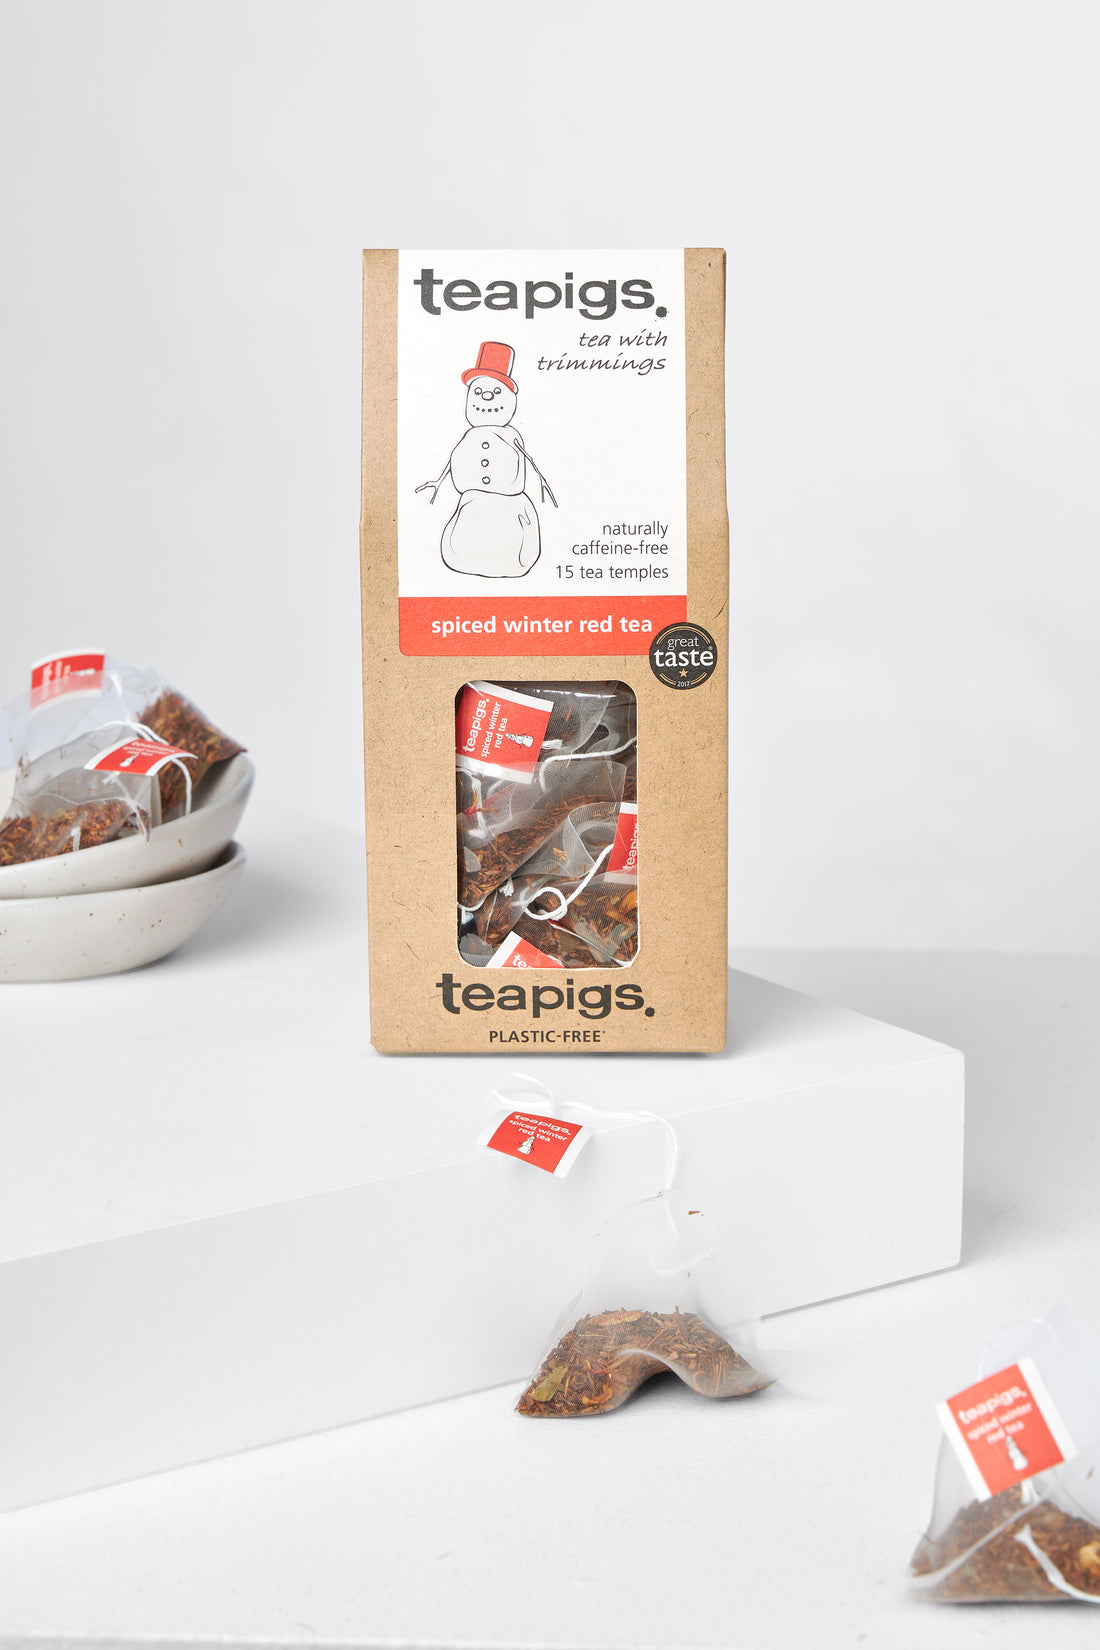 Spiced winter red tea bags